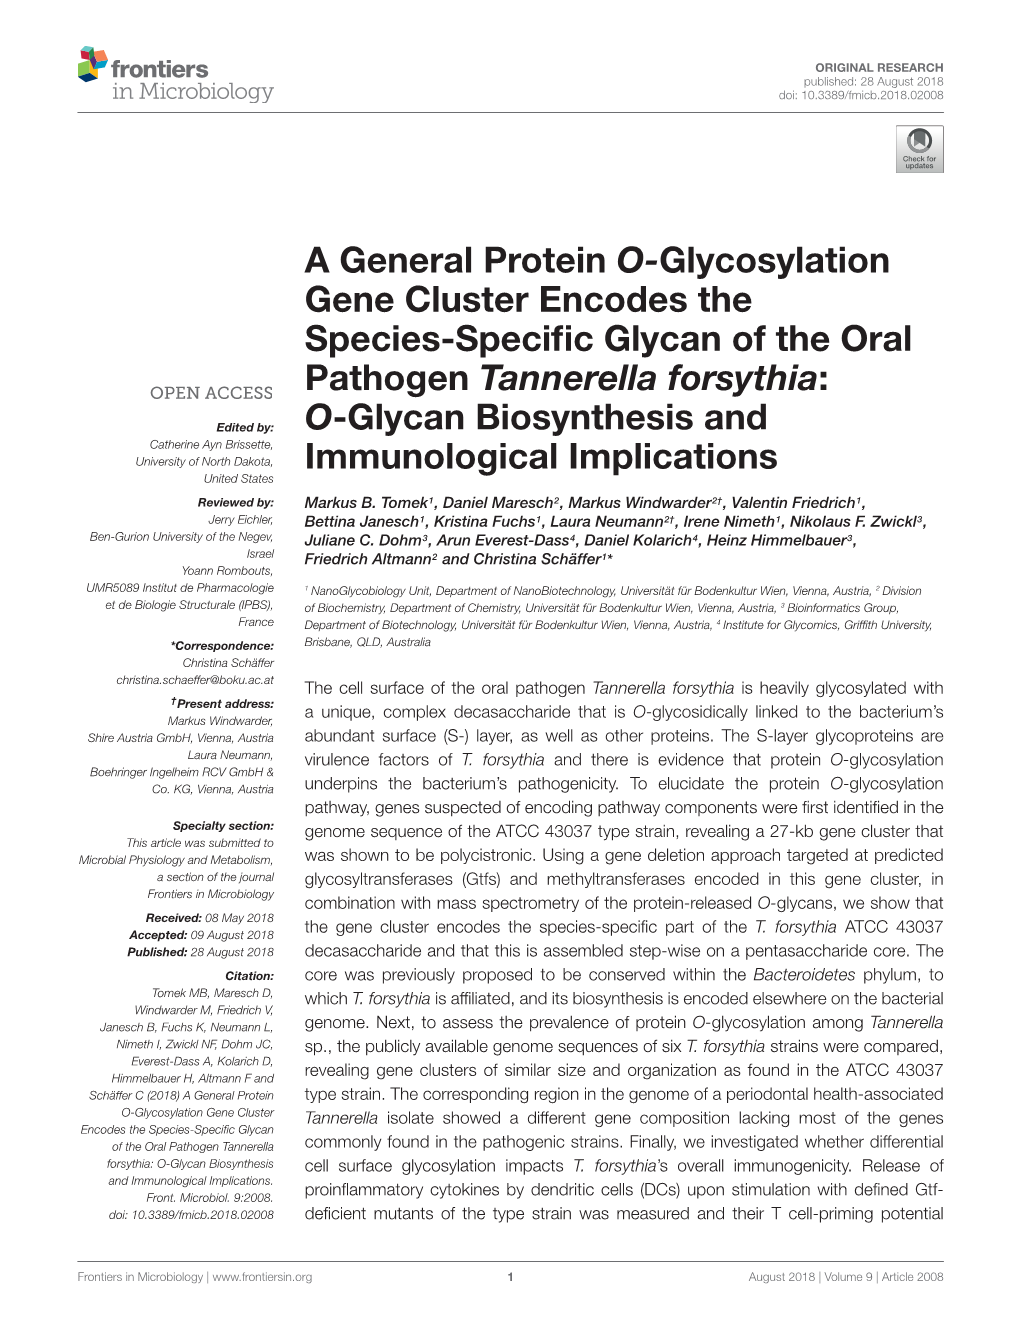 A General Protein O-Glycosylation Gene Cluster Encodes the Species-Speciﬁc Glycan of the Oral Pathogen Tannerella Forsythia